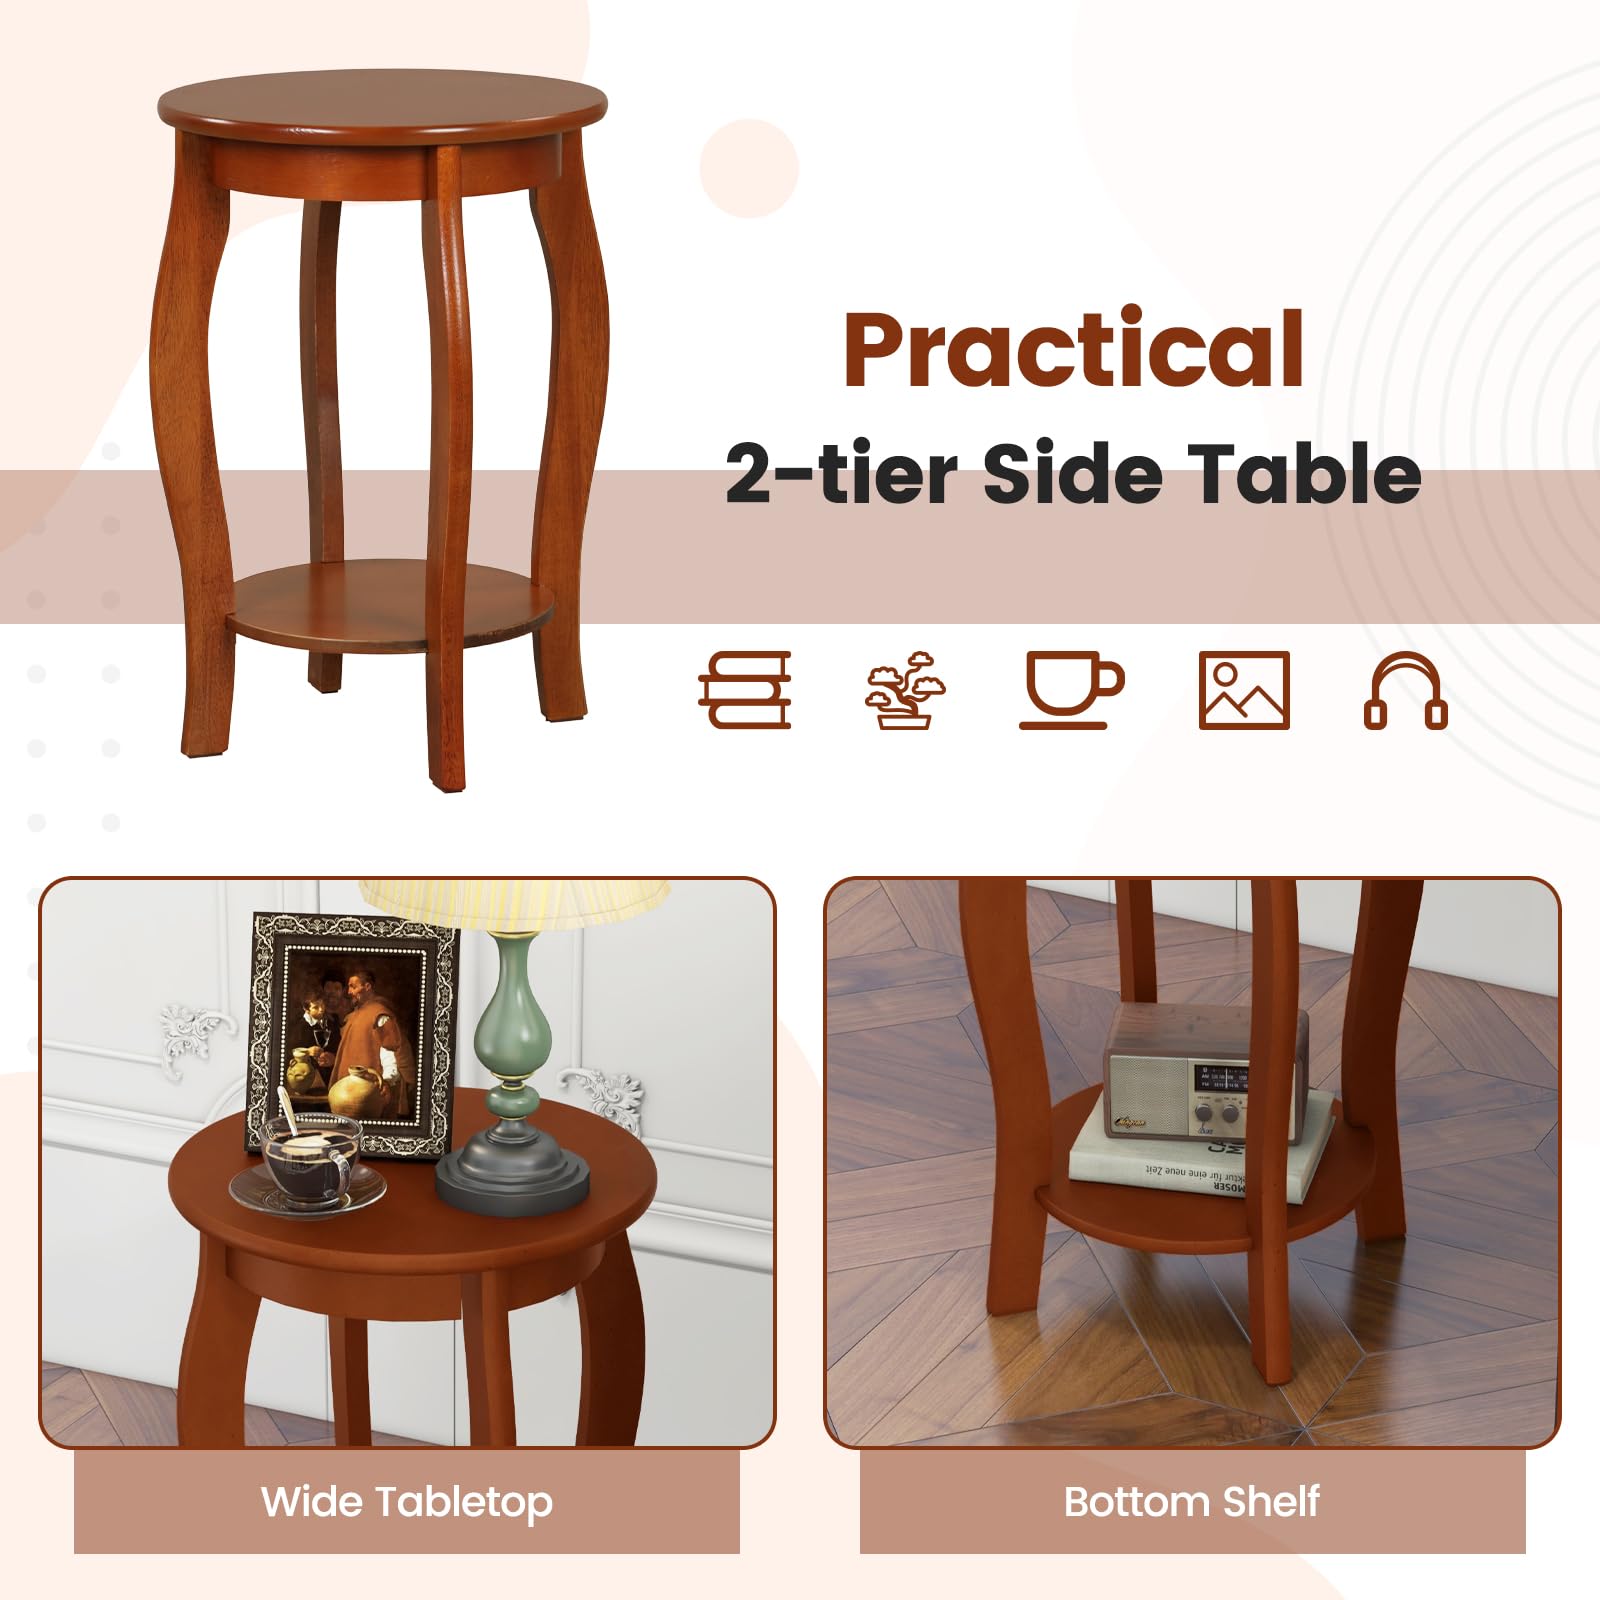 Giantex 2-Tier Round End Table, Narrow Tiered Telephone Table with Storage Shelf, Solid Wood Legs